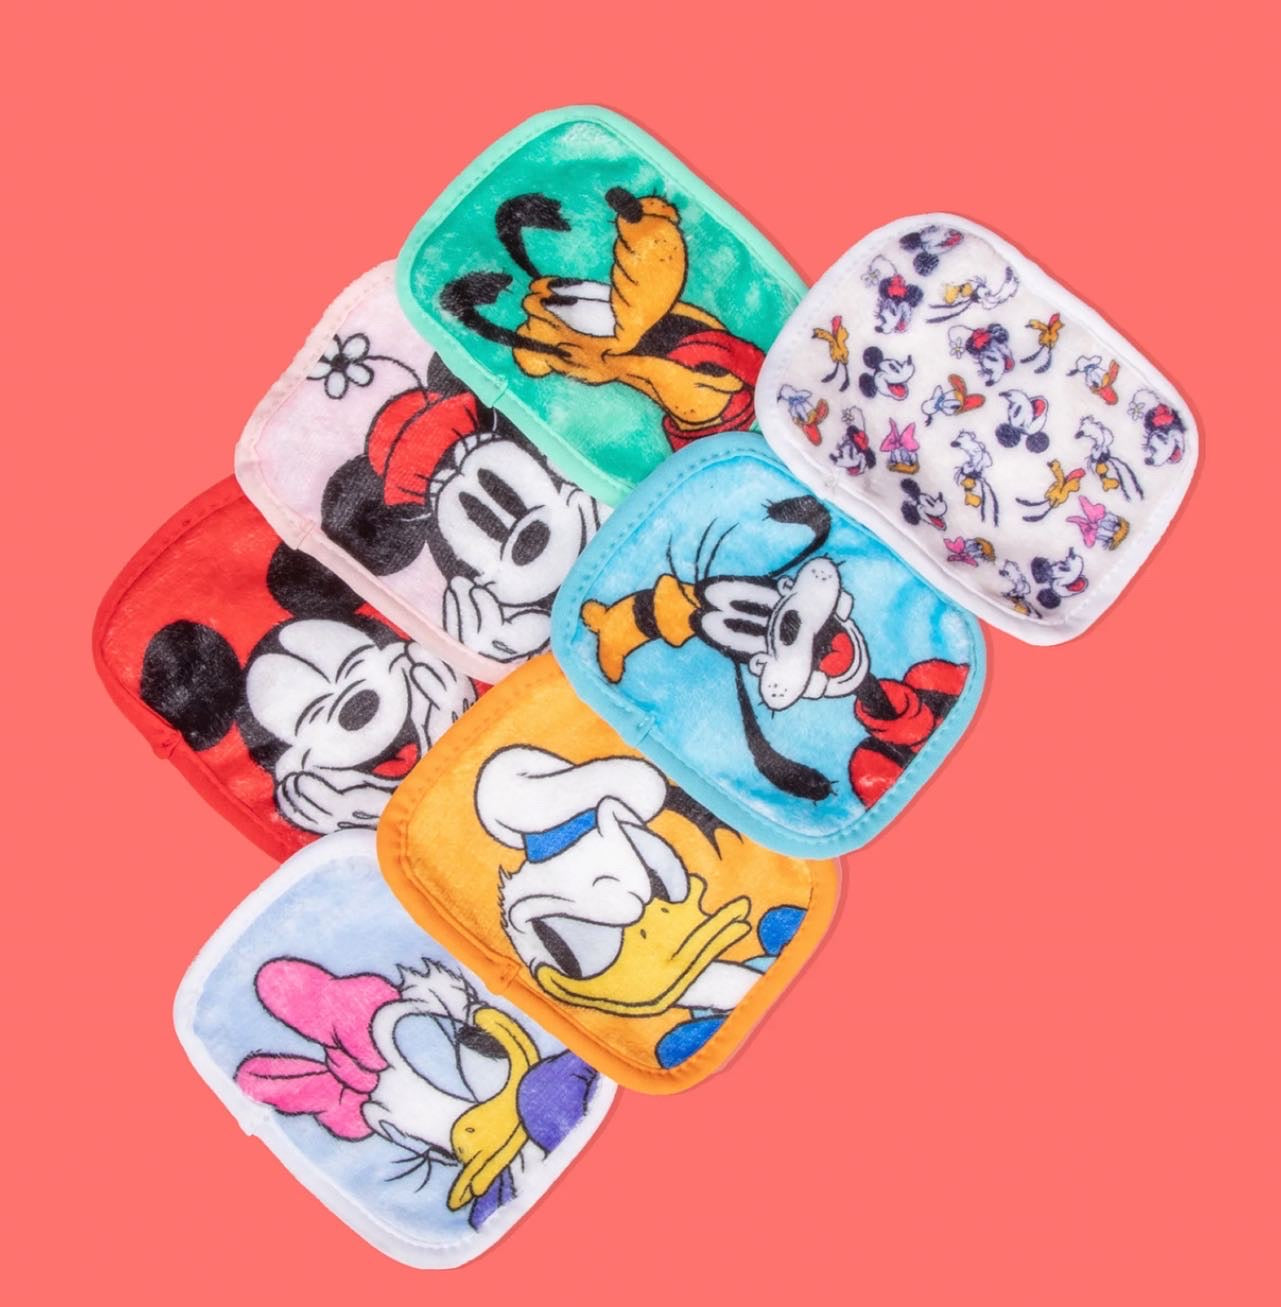 THE ORIGINAL MAKEUP ERASER, MICKEY AND FRIENDS 7 DAY SET